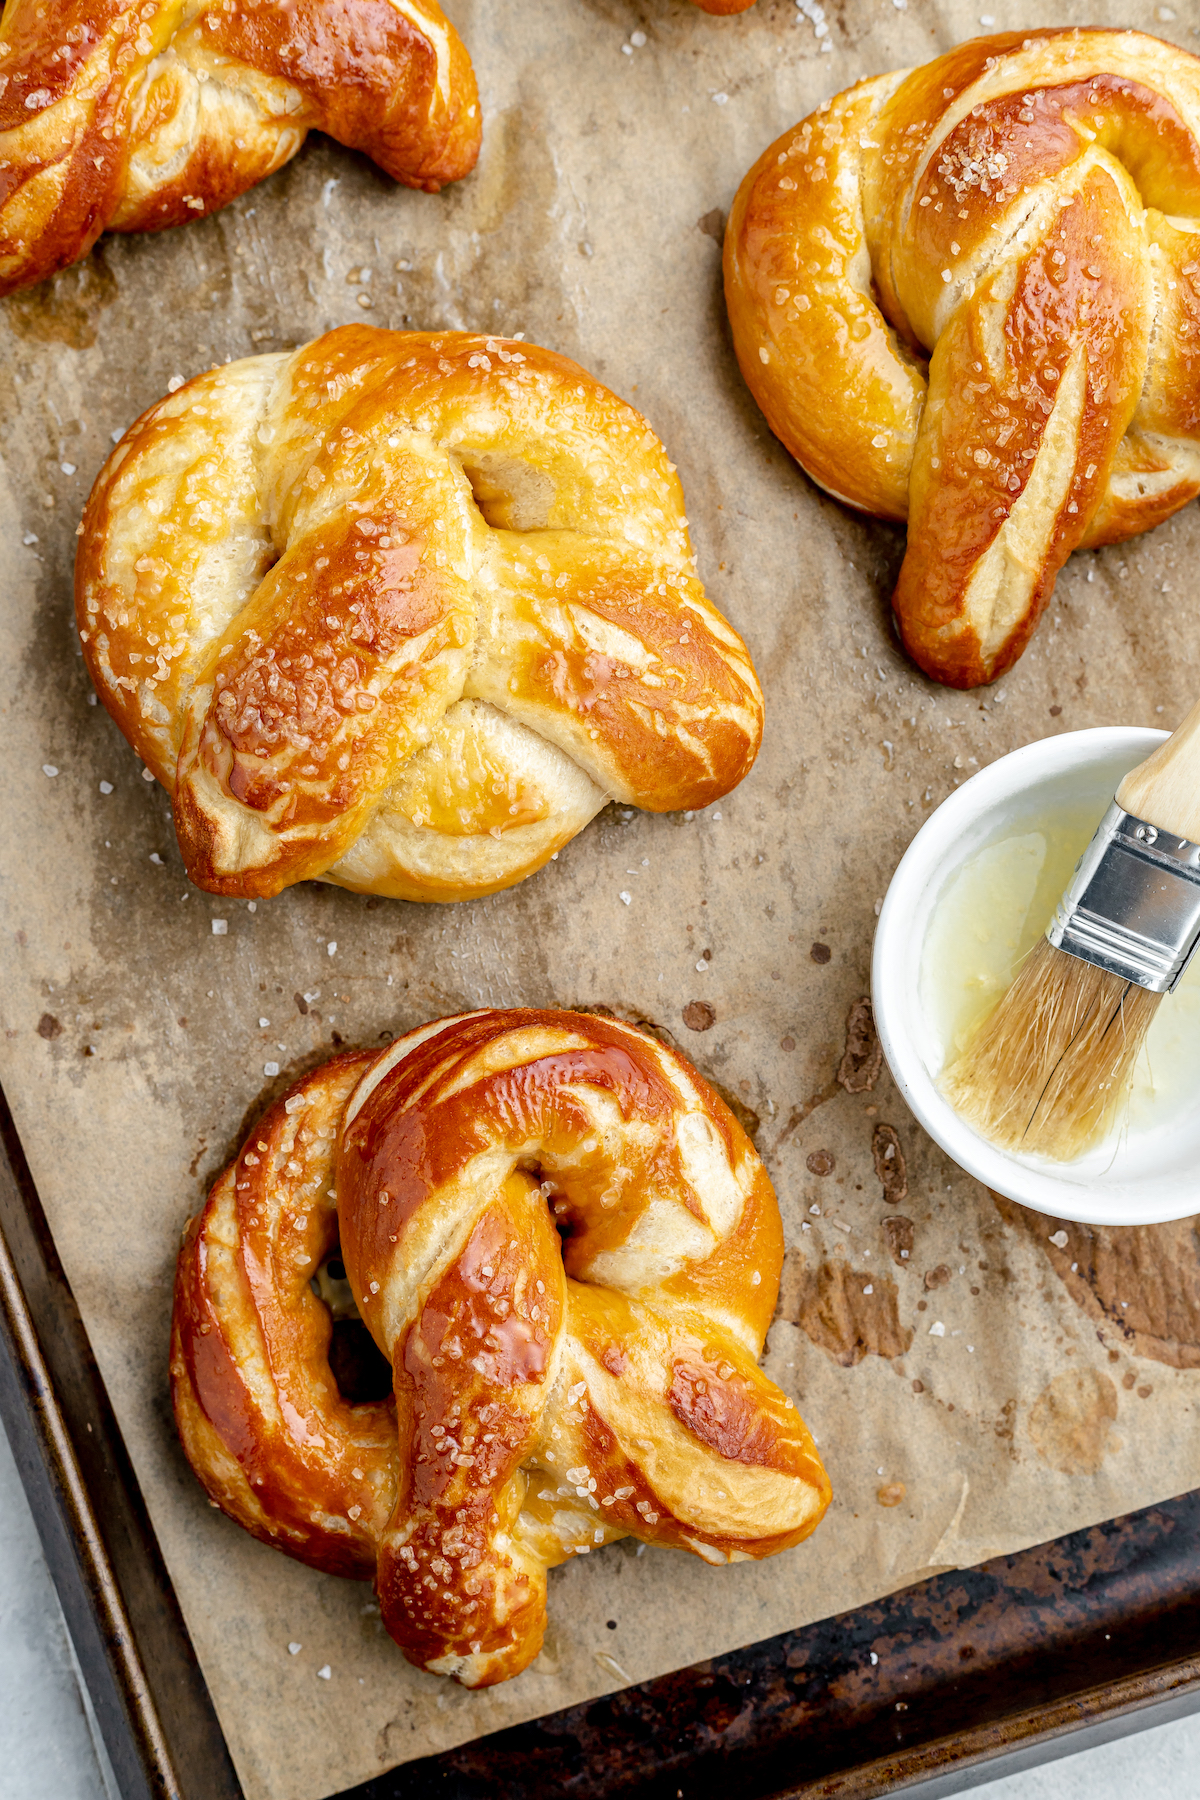 Baked pretzels on a parchment-lined baking sheet with a dish of egg wash and a brush.